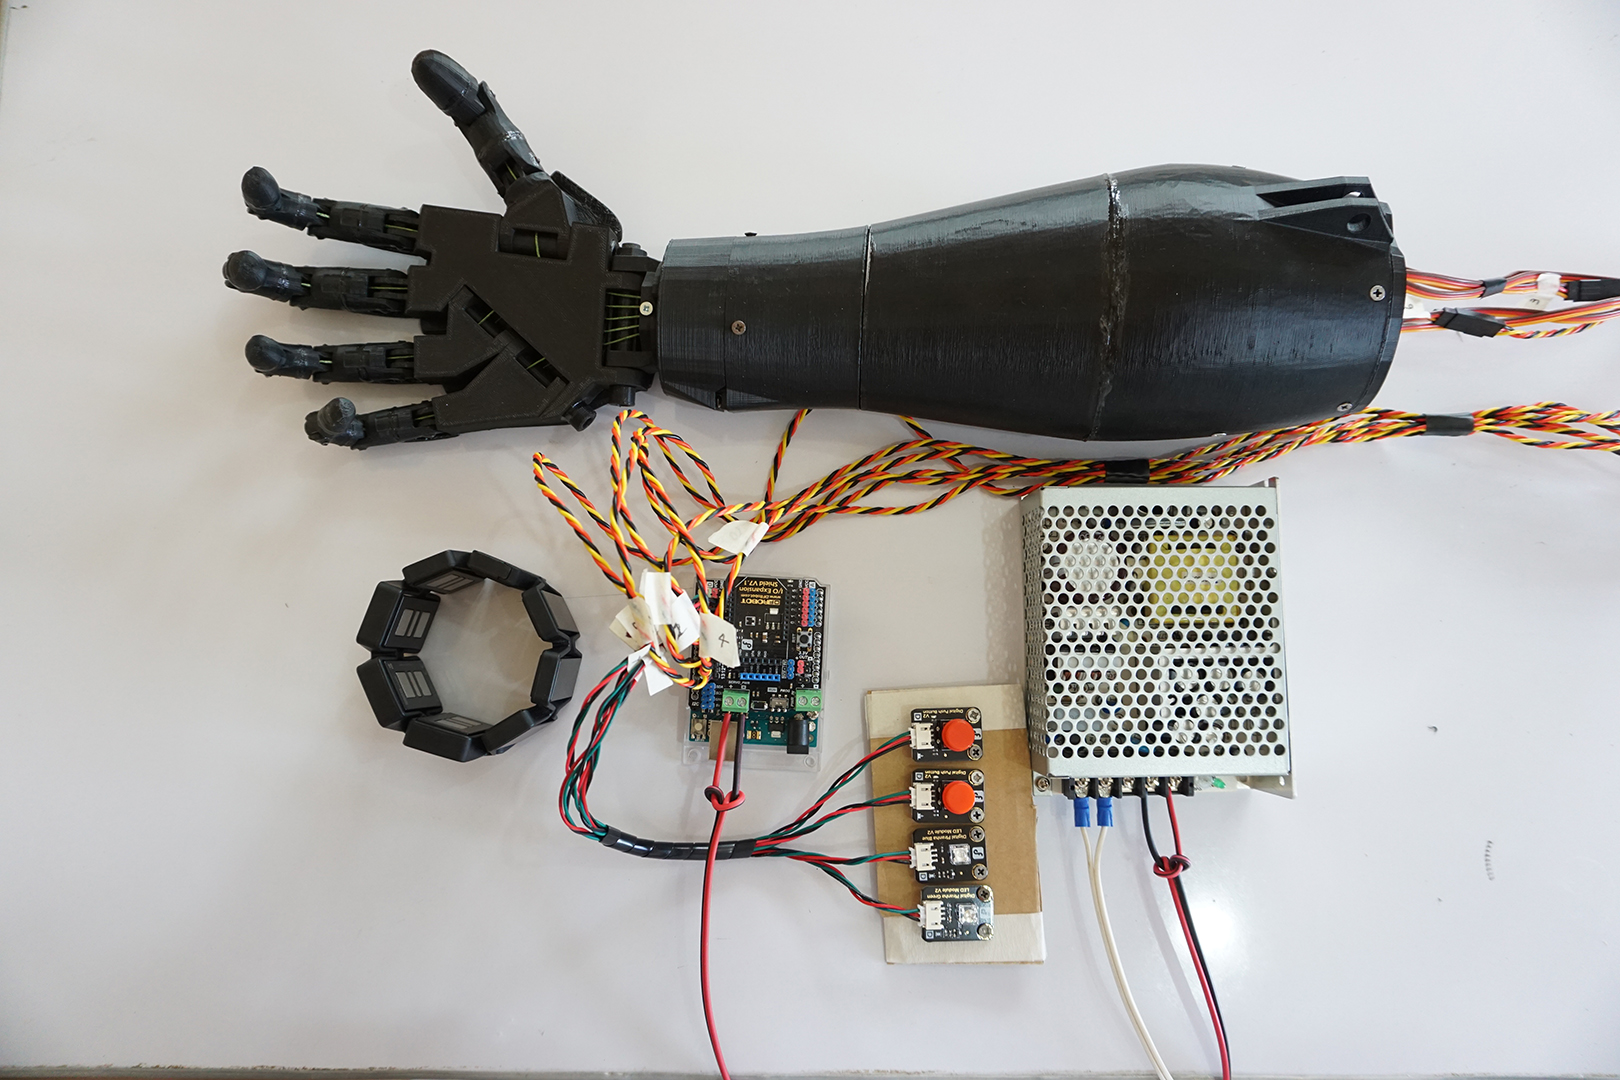 3D-Printed Myoelectric Hand Prosthesis - The IEEE Maker Project